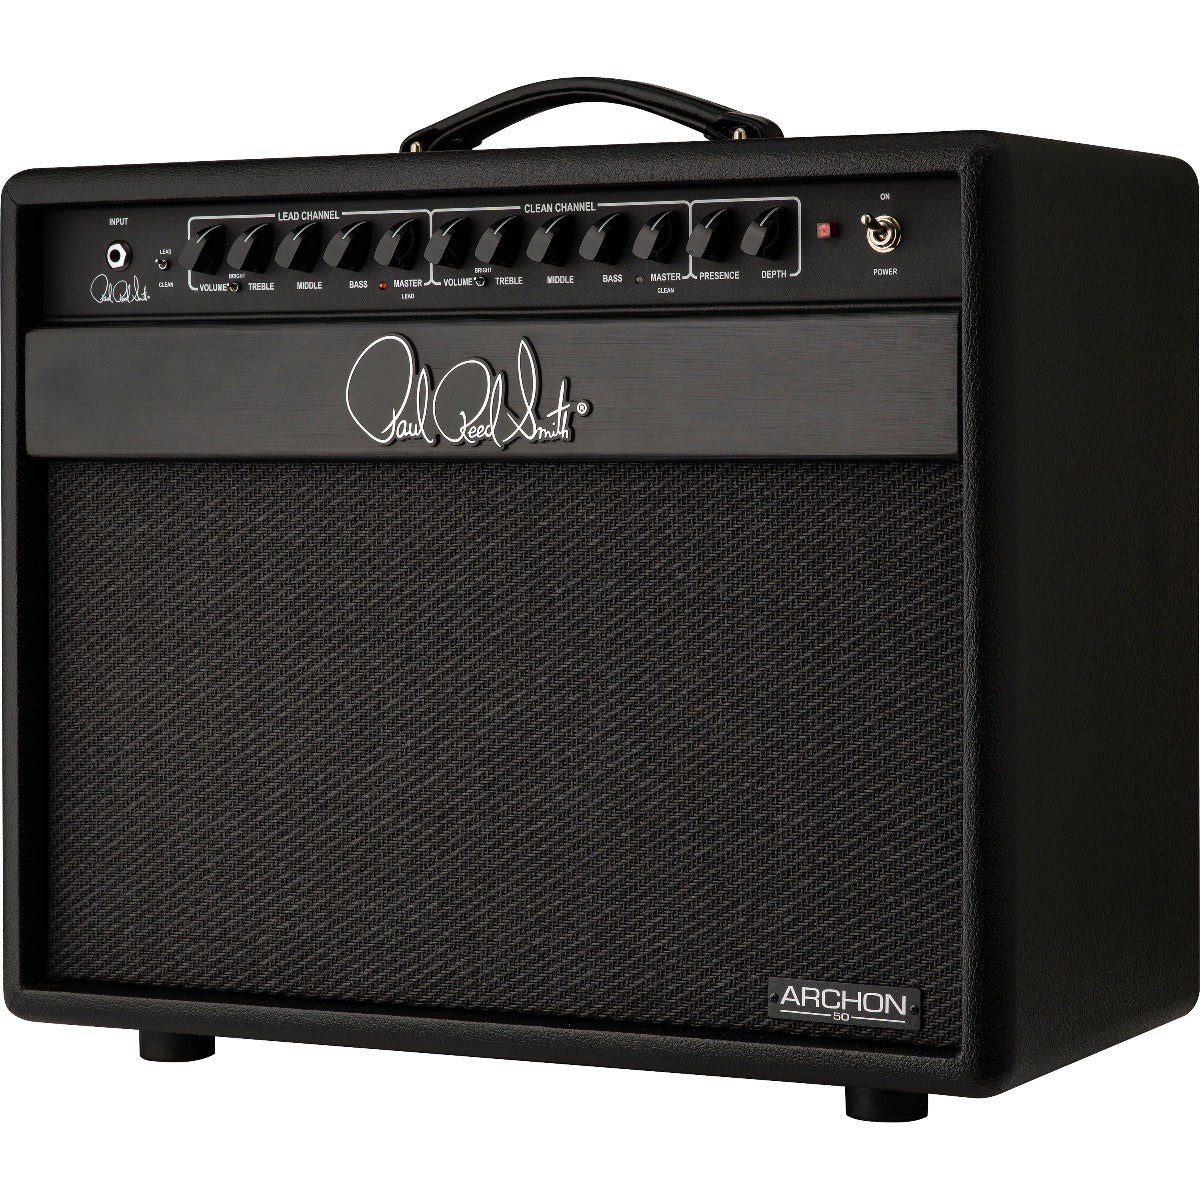 Perspective view of PRS Archon 50 Combo 1x12 50W Tube Guitar Amplifier with Celestion V-Type Speaker showing front and right side